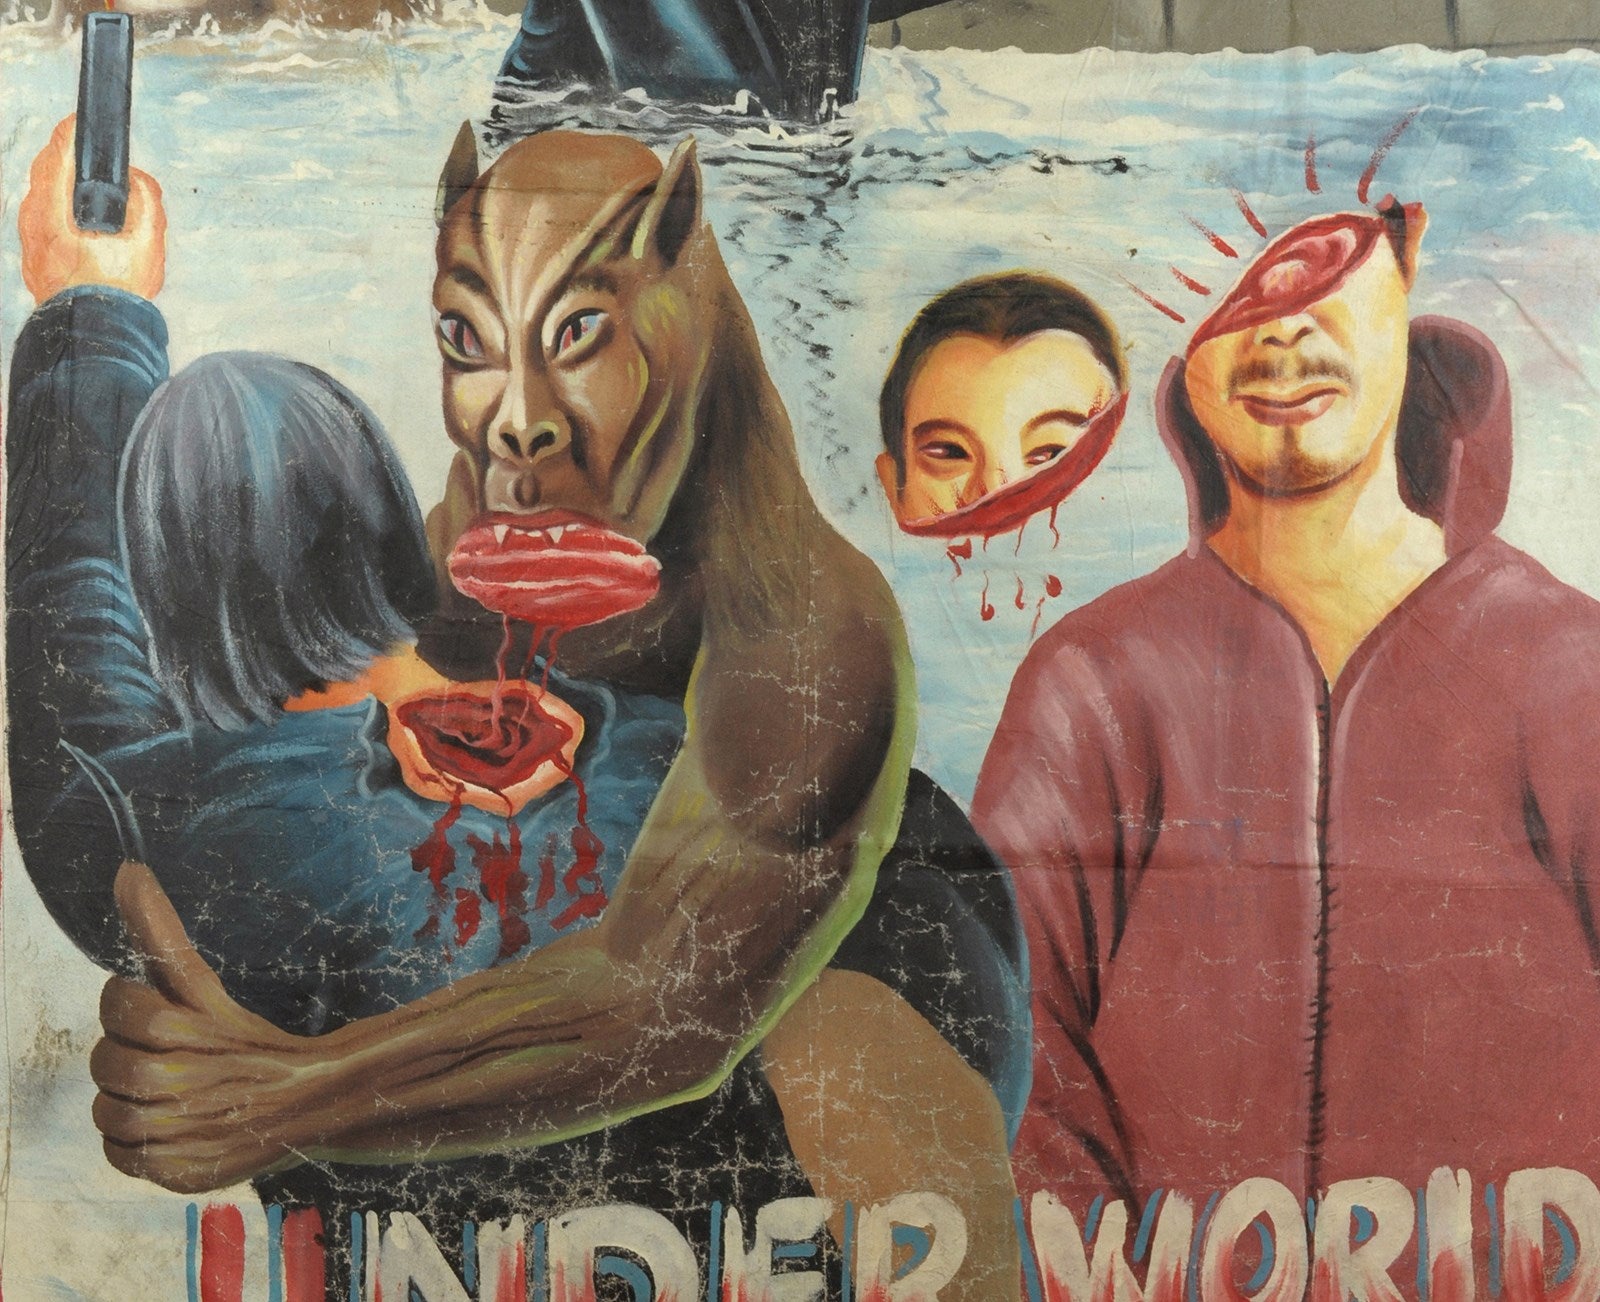 UNDERWORLD MOVIE POSTER HAND PAINTED IN GHANA FOR THE LOCAL CINEMA ART DETAILS